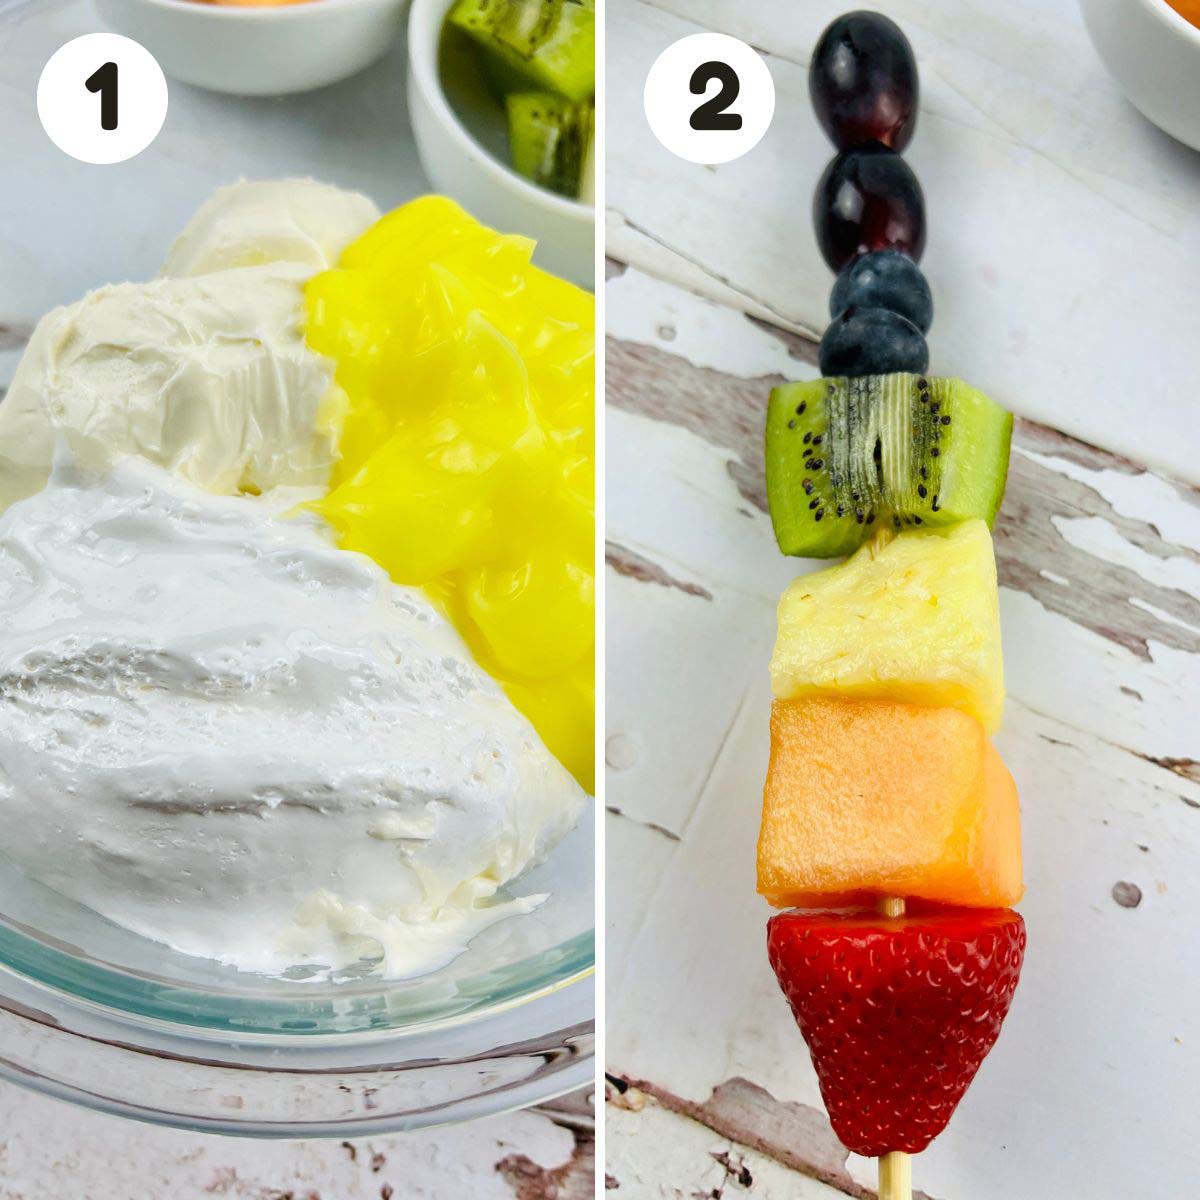 Steps to make the fruit skewers and dip.